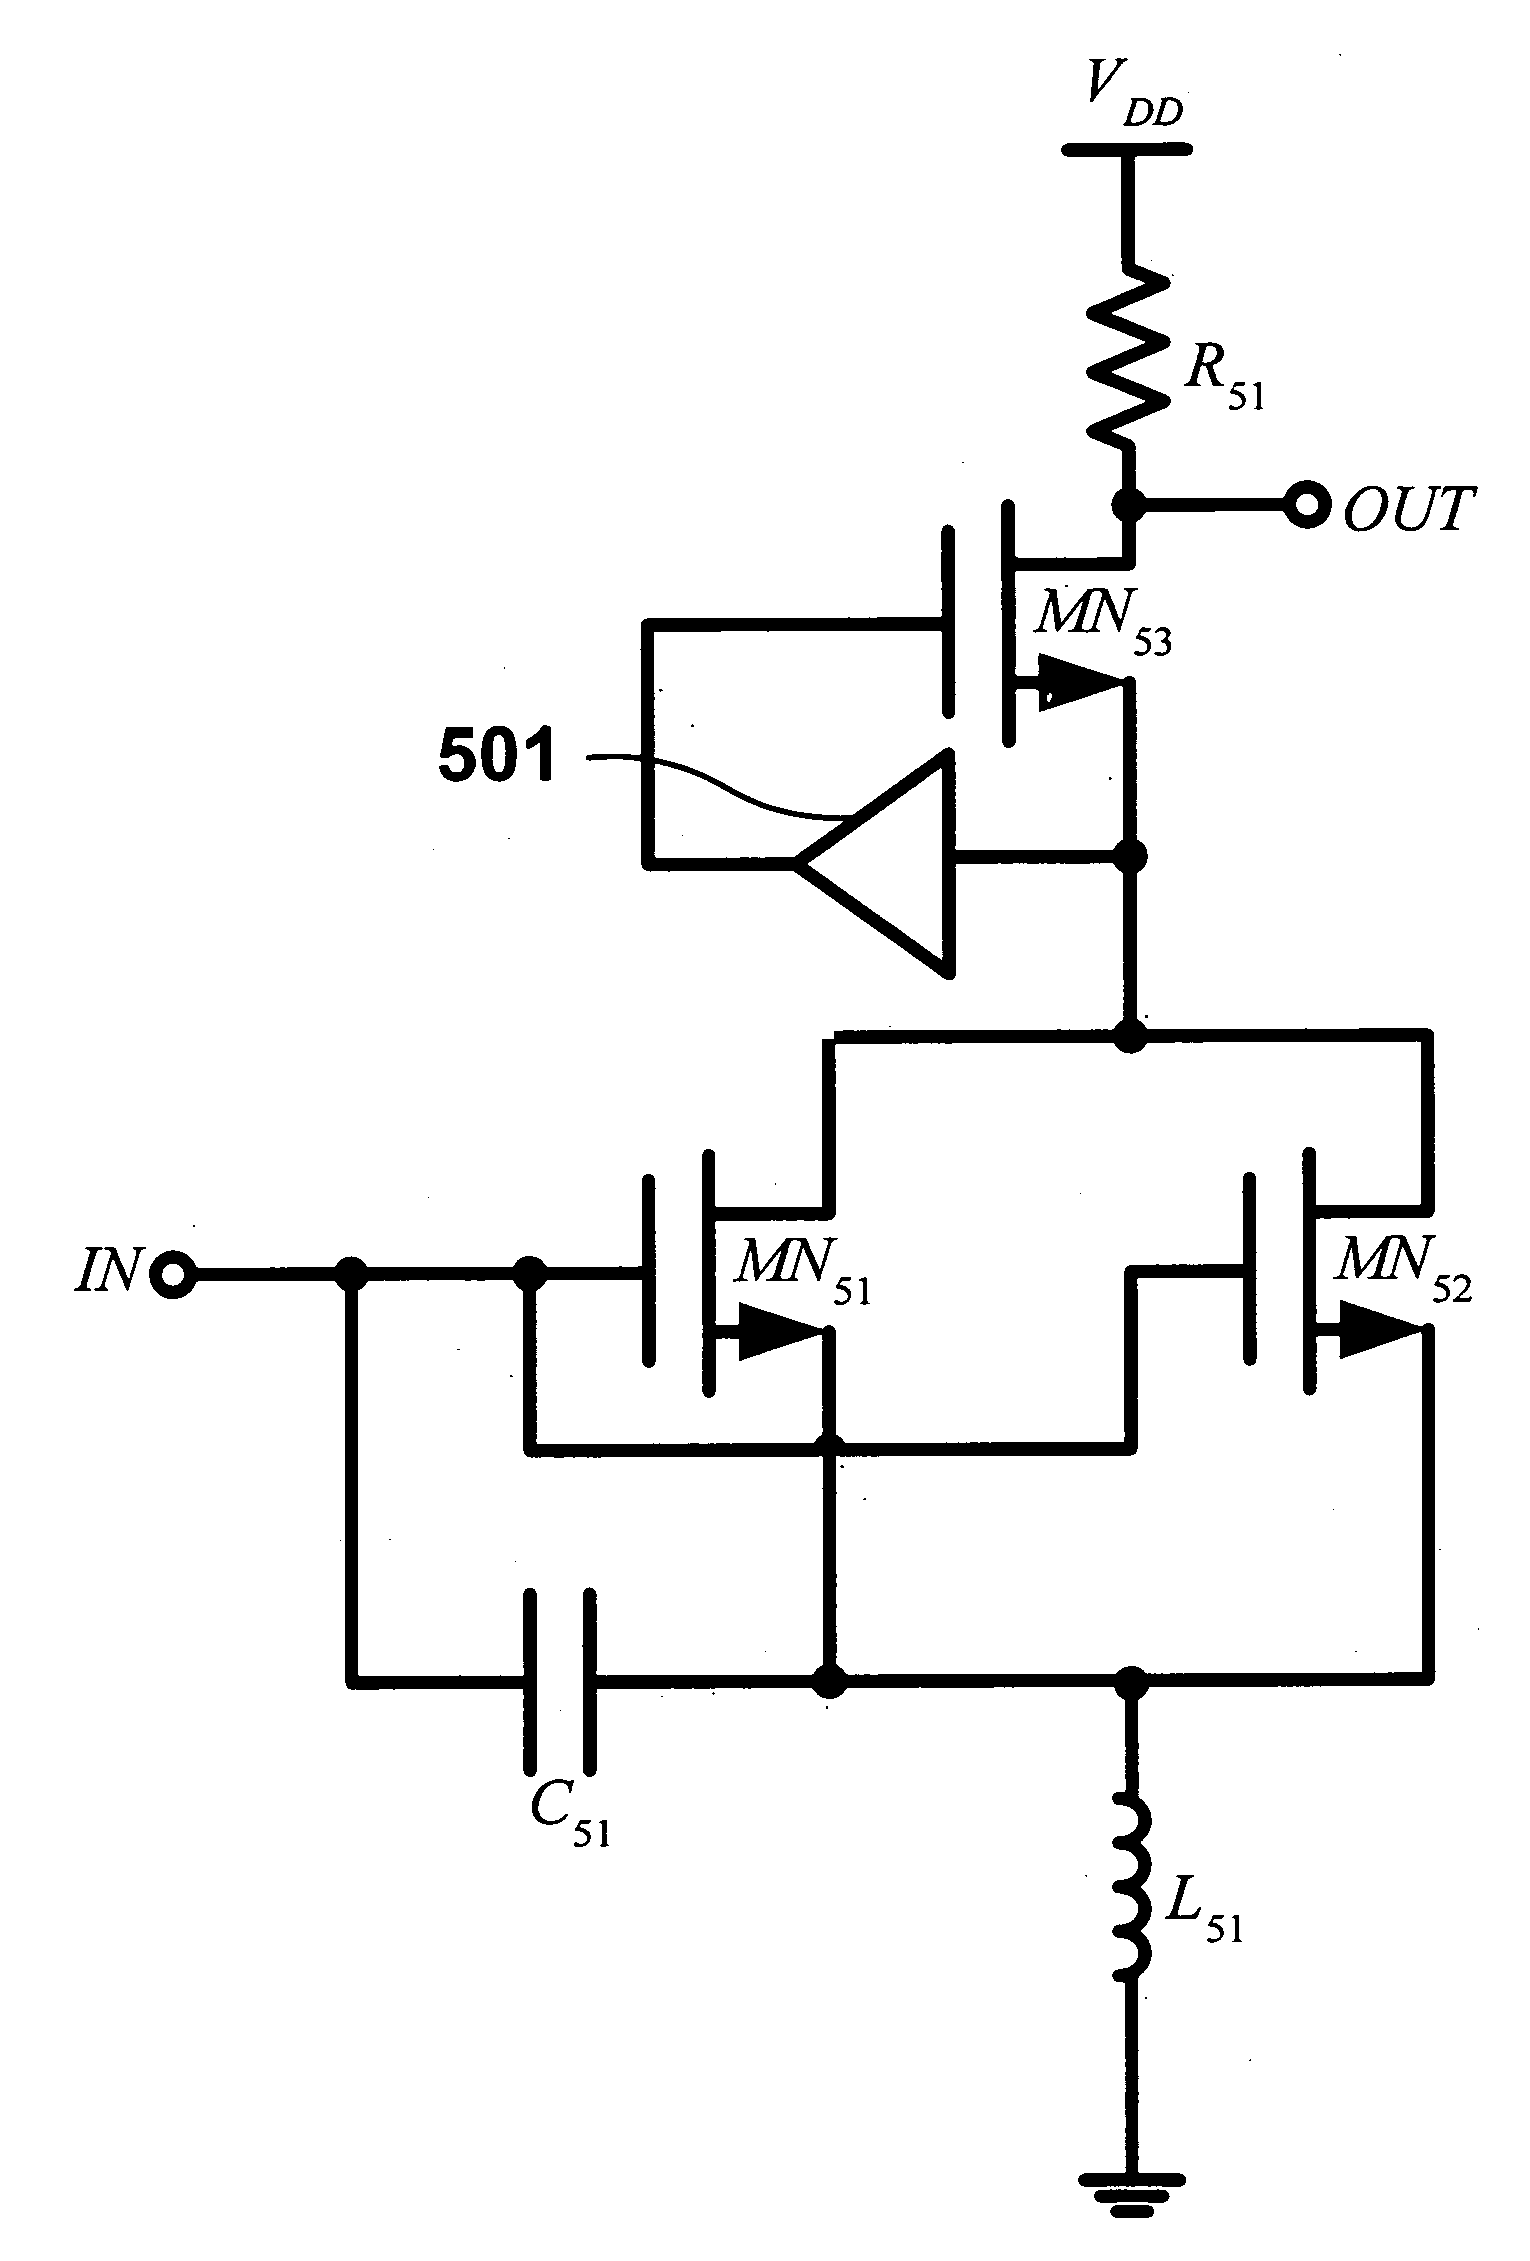 Amplifier circuit having improved linearity and frequency band using multiple gated transistor